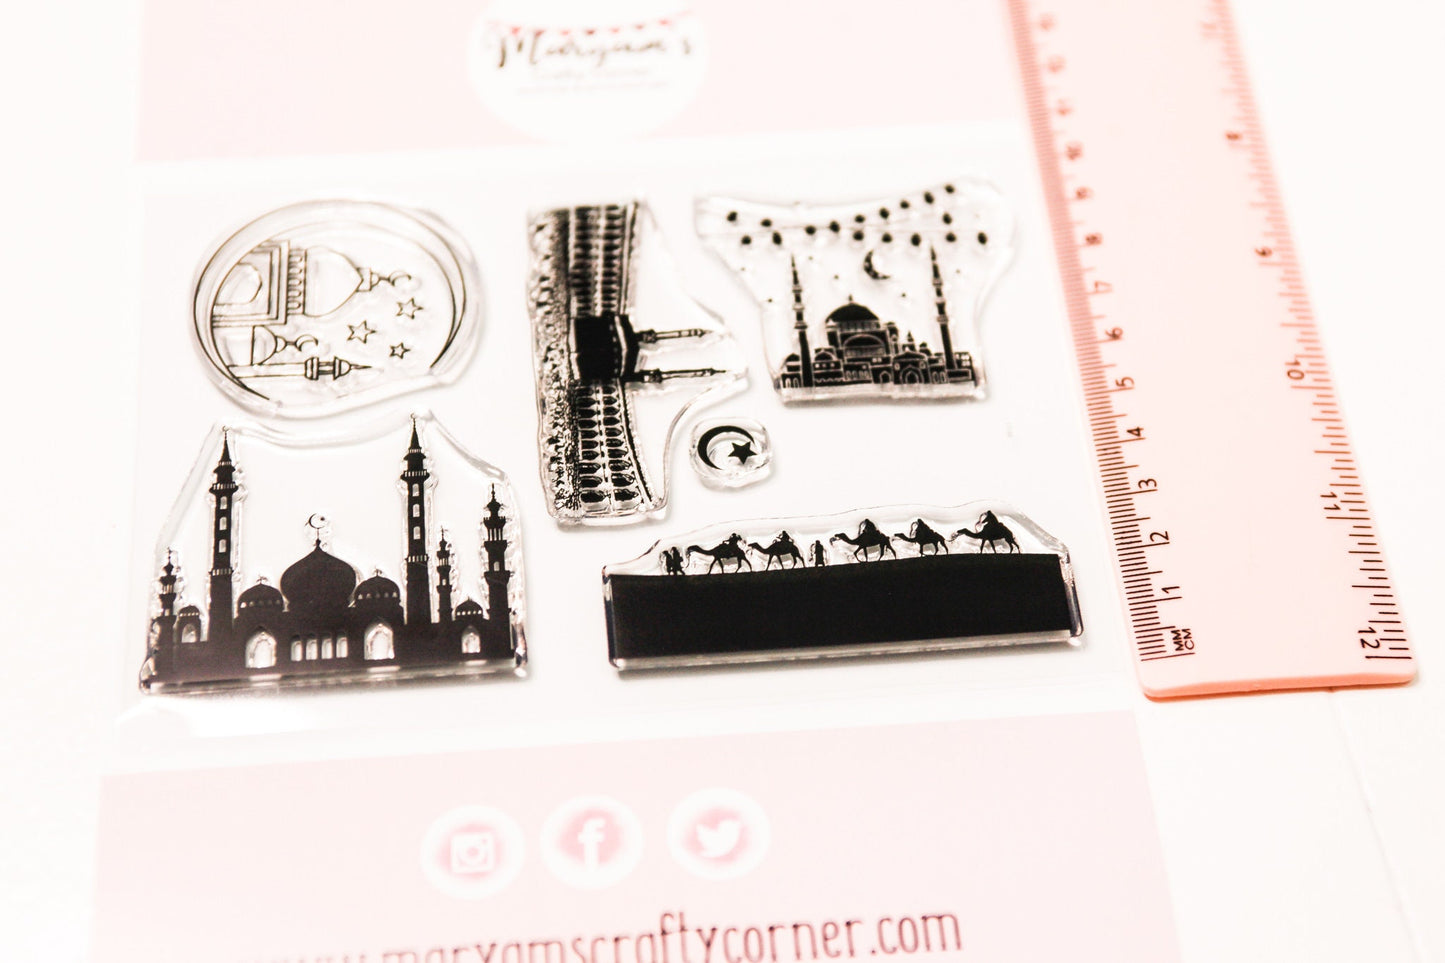 Pack of 6 Eid clear stamps for ramadan, eid islamic greeting cards, Perfect clear stamps celebrating eid & ramadan, wonderful crafting idea